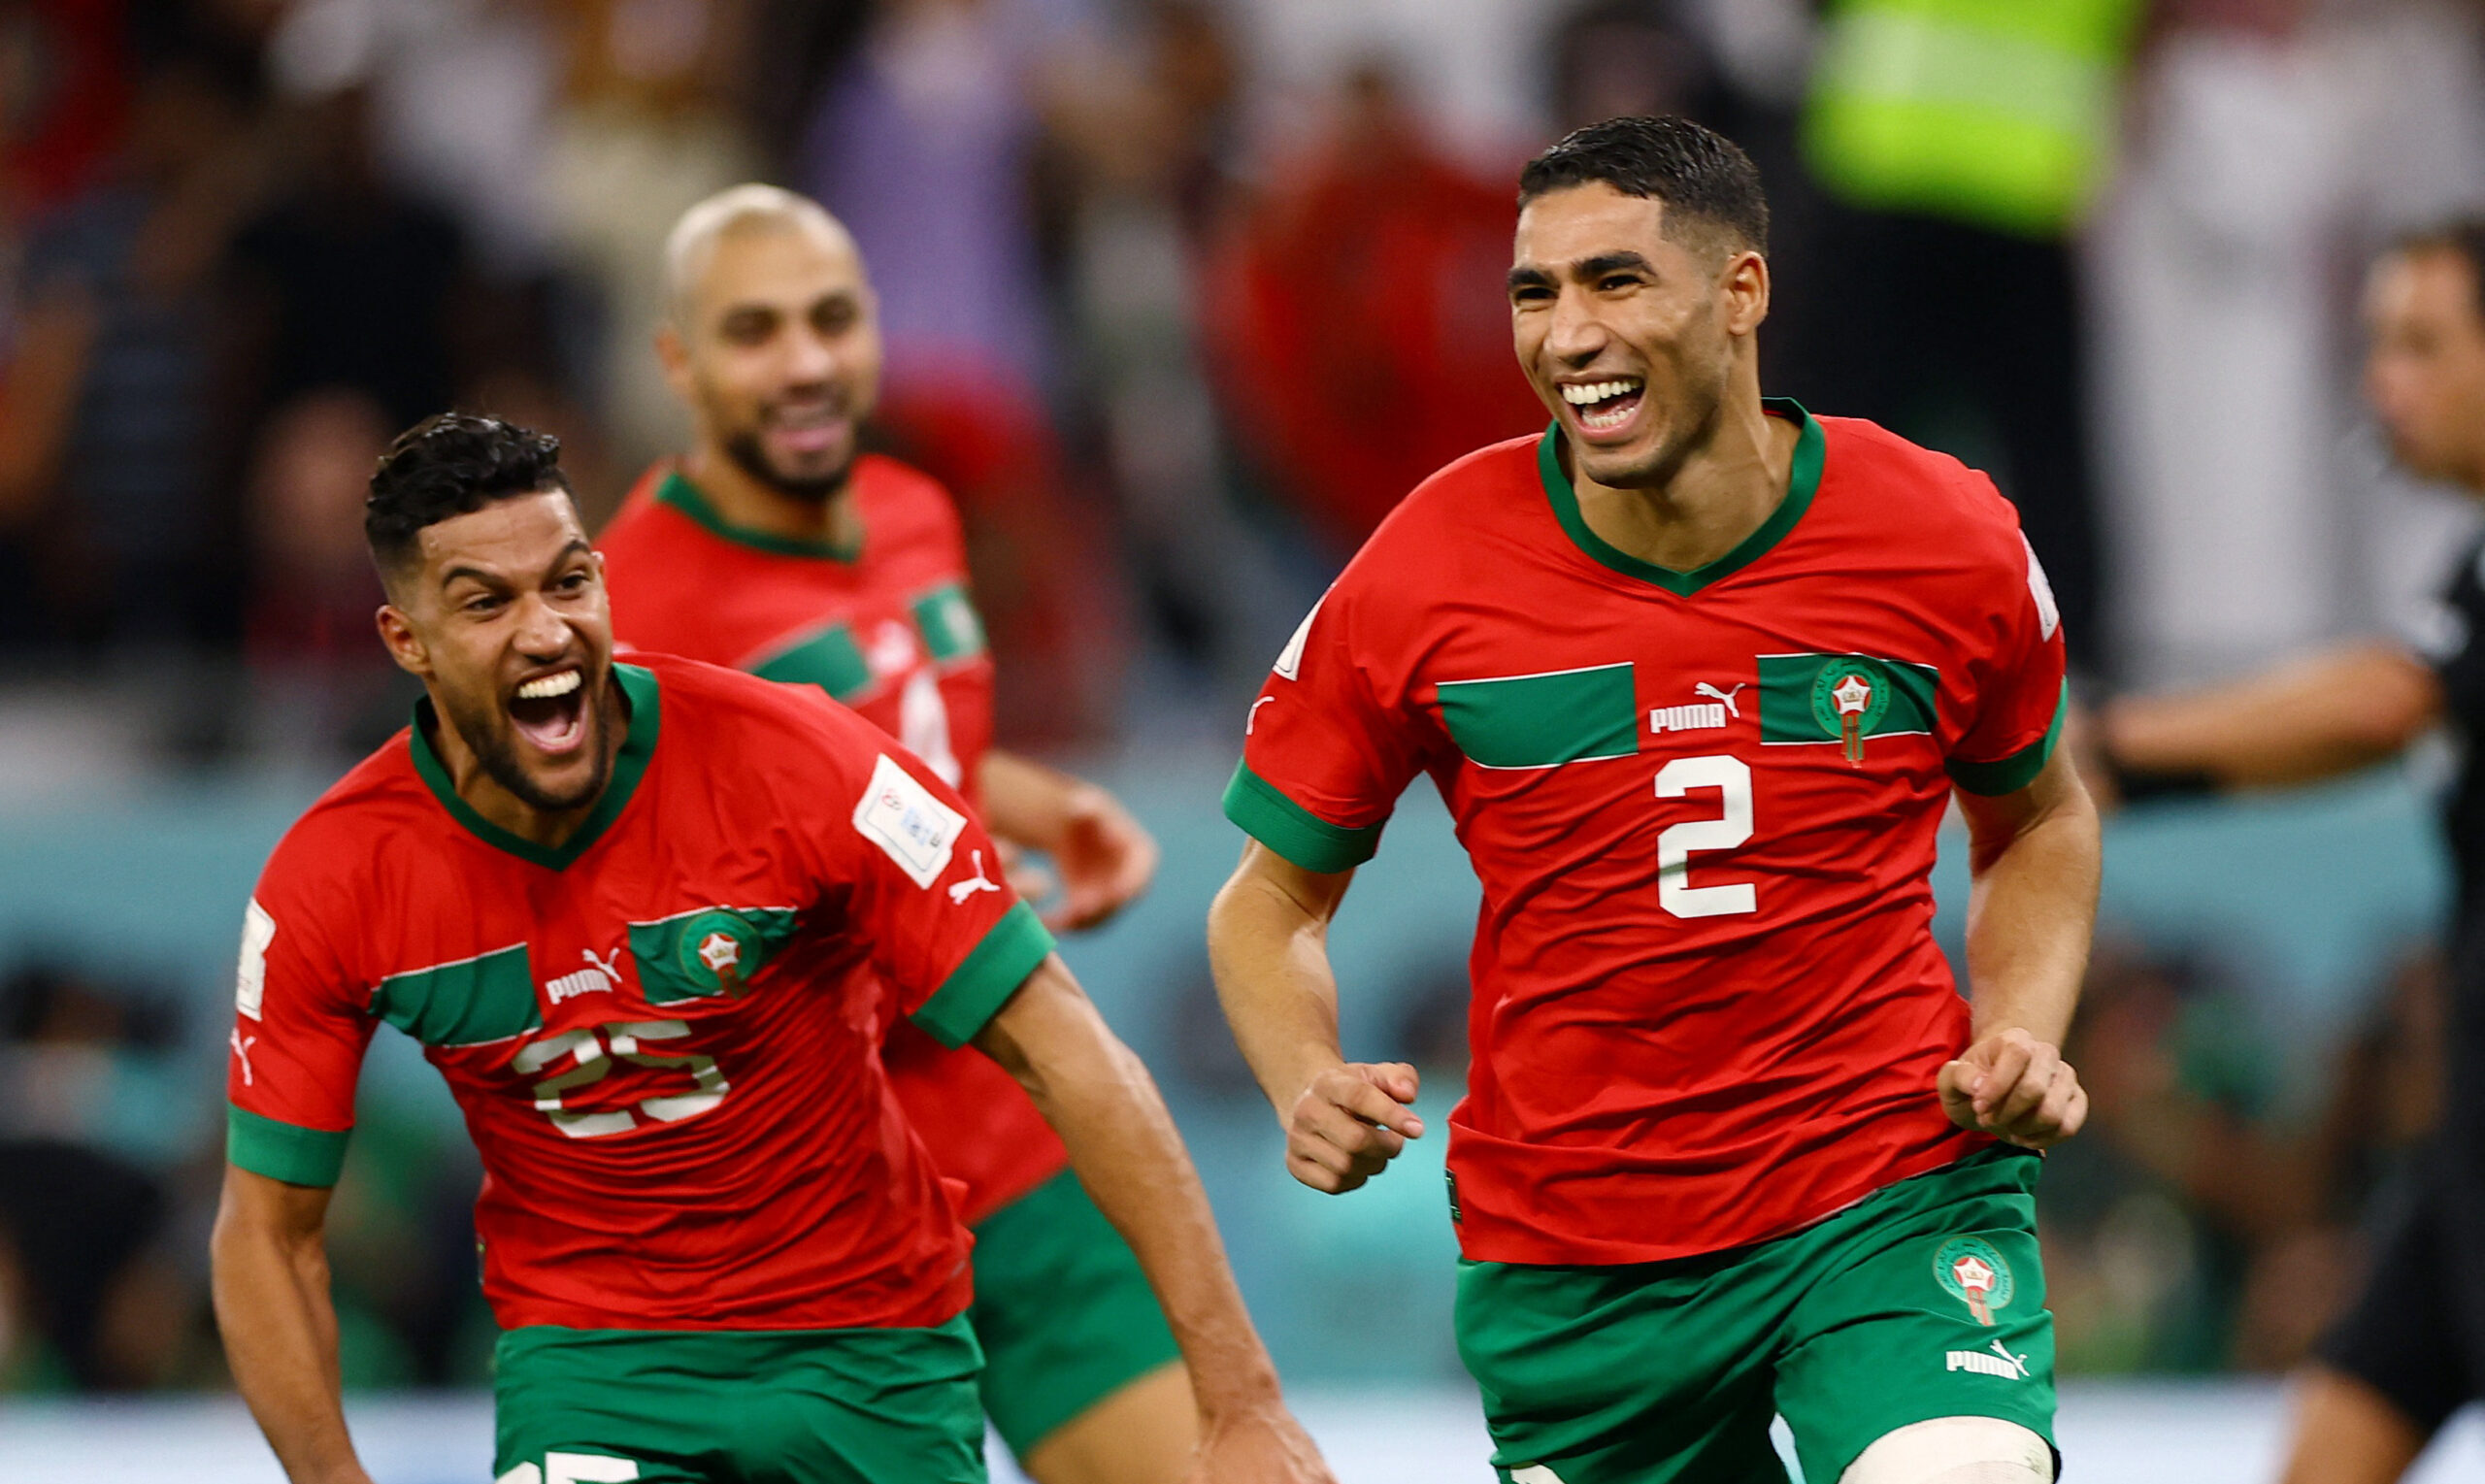 Morocco made history on Tuesday night as they landed into the World Cup Quarter Finals for the first time after beating Spain in a penalty shootout.